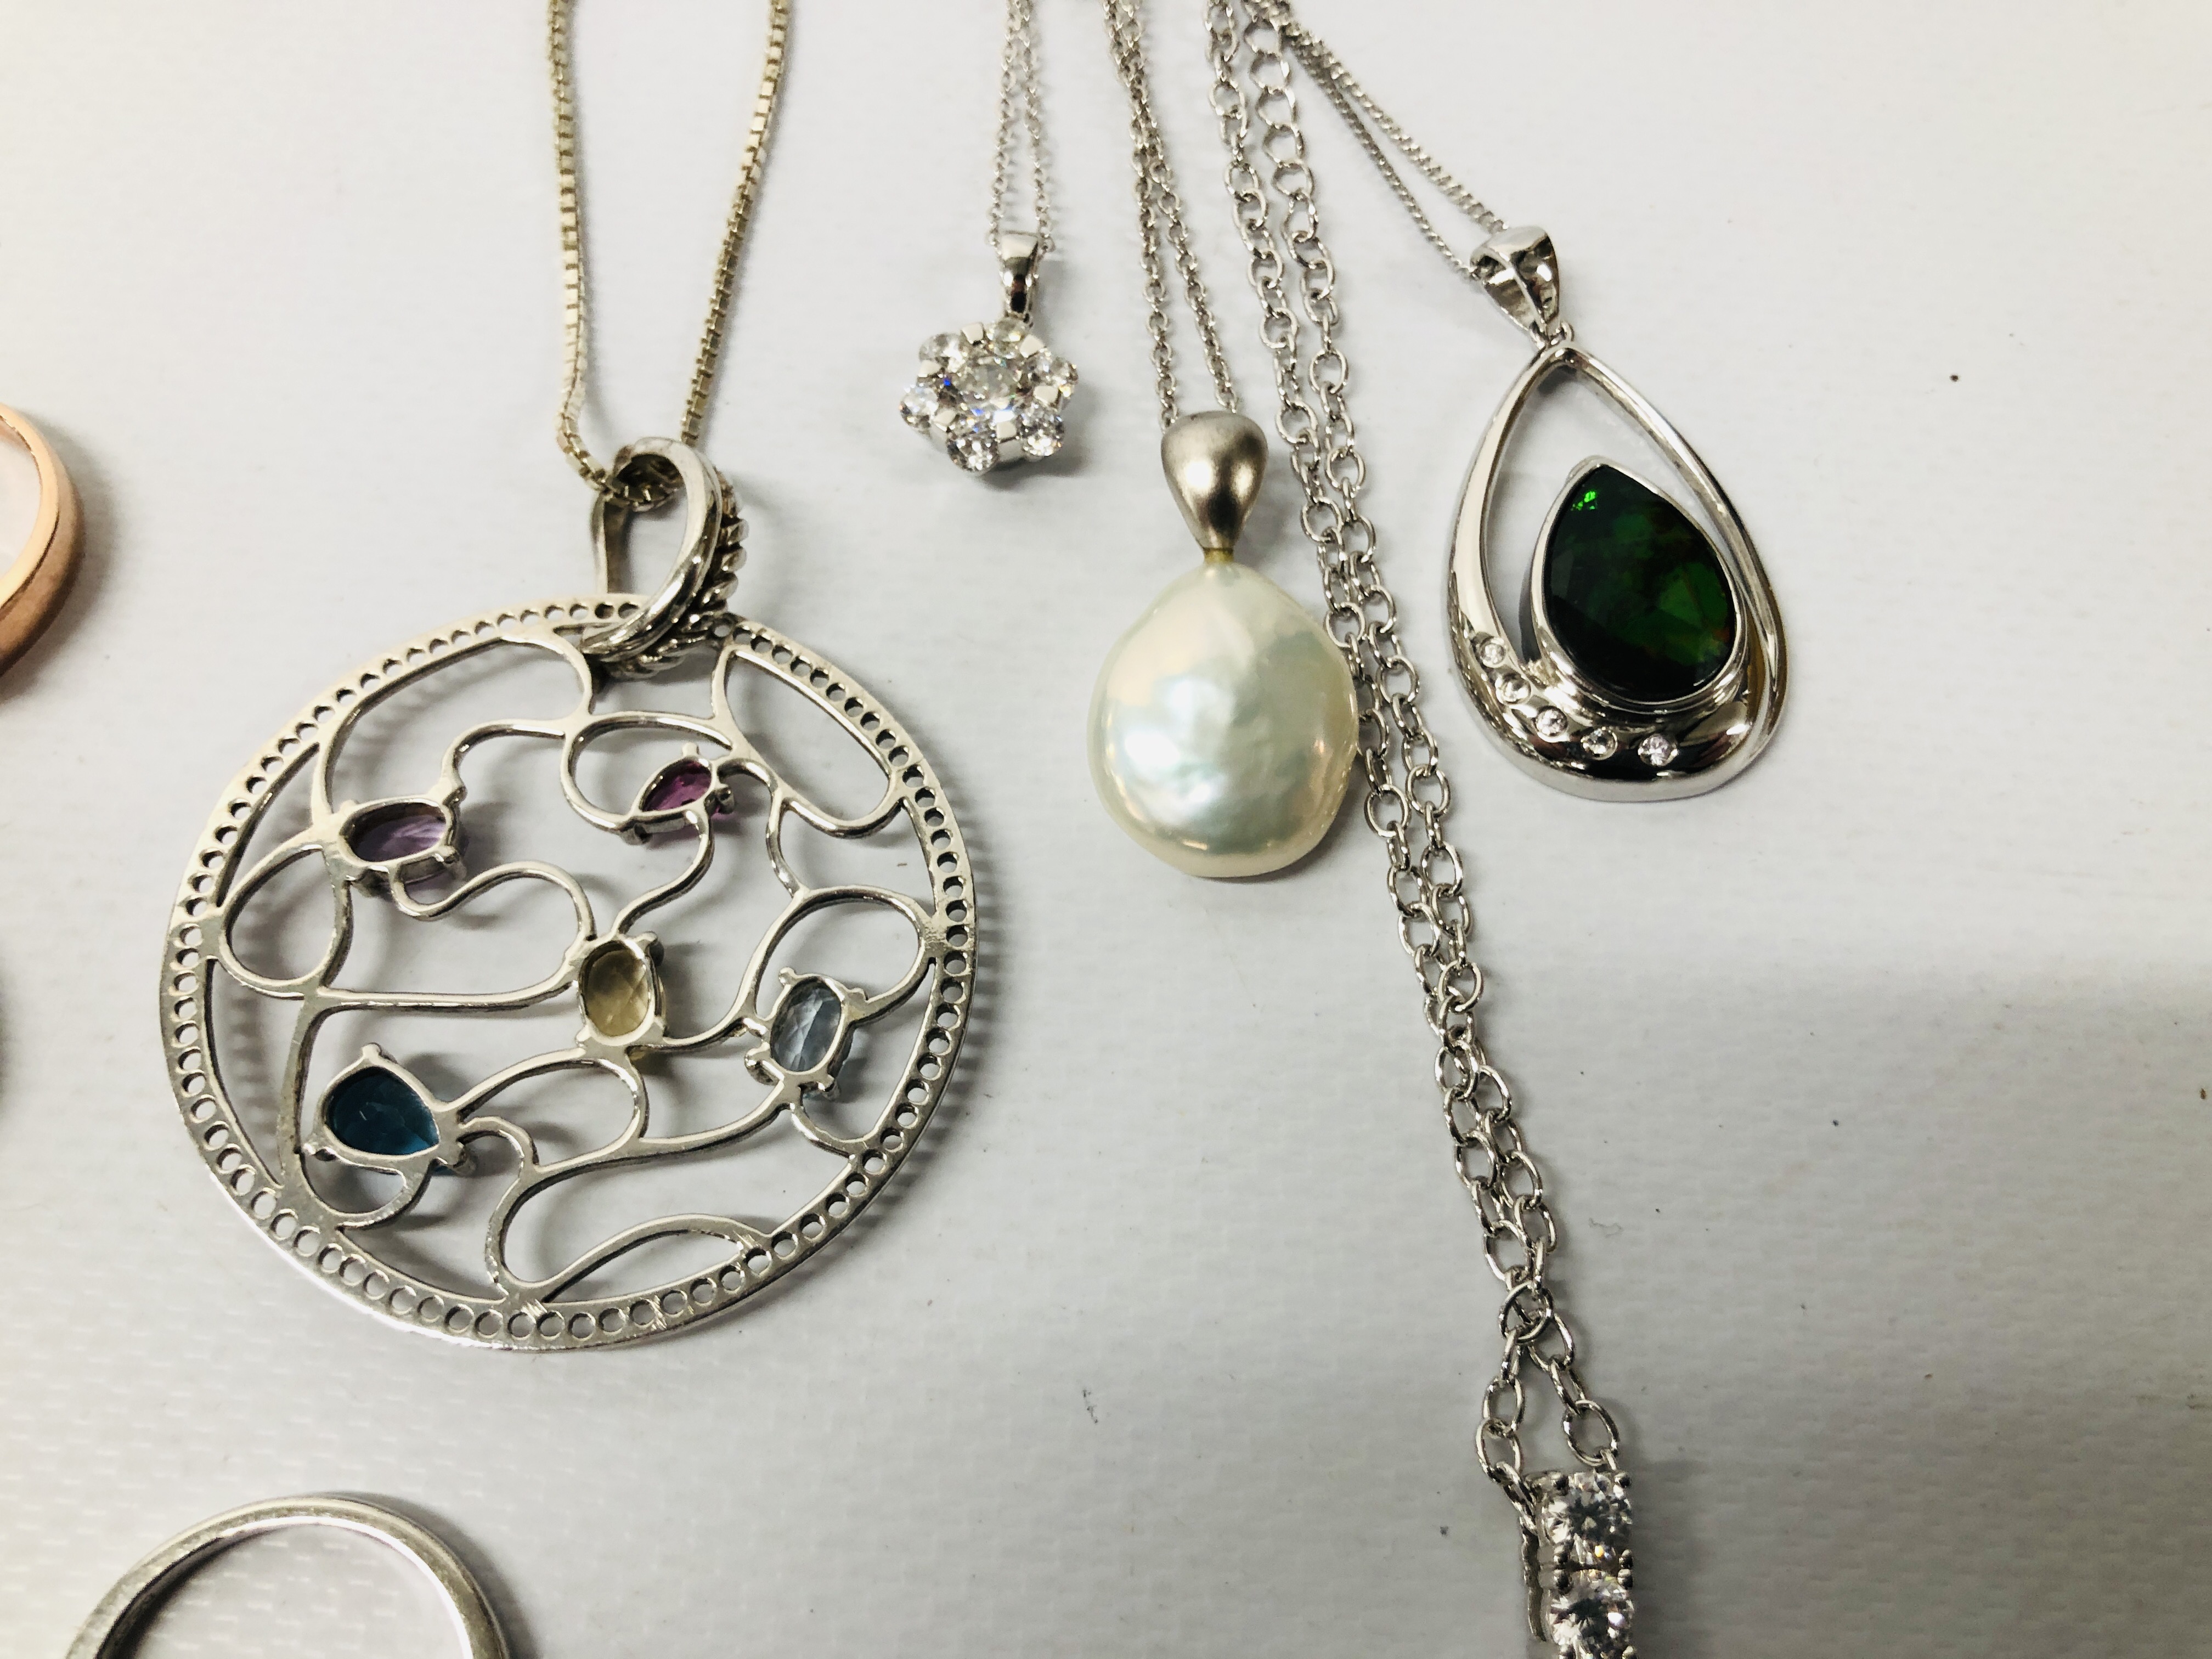 4 X VARIOUS SILVER DESIGNERS PENDANT NECKLACES + 6 X VARIOUS SILVER STONE SET DRESS RINGS - Image 3 of 4